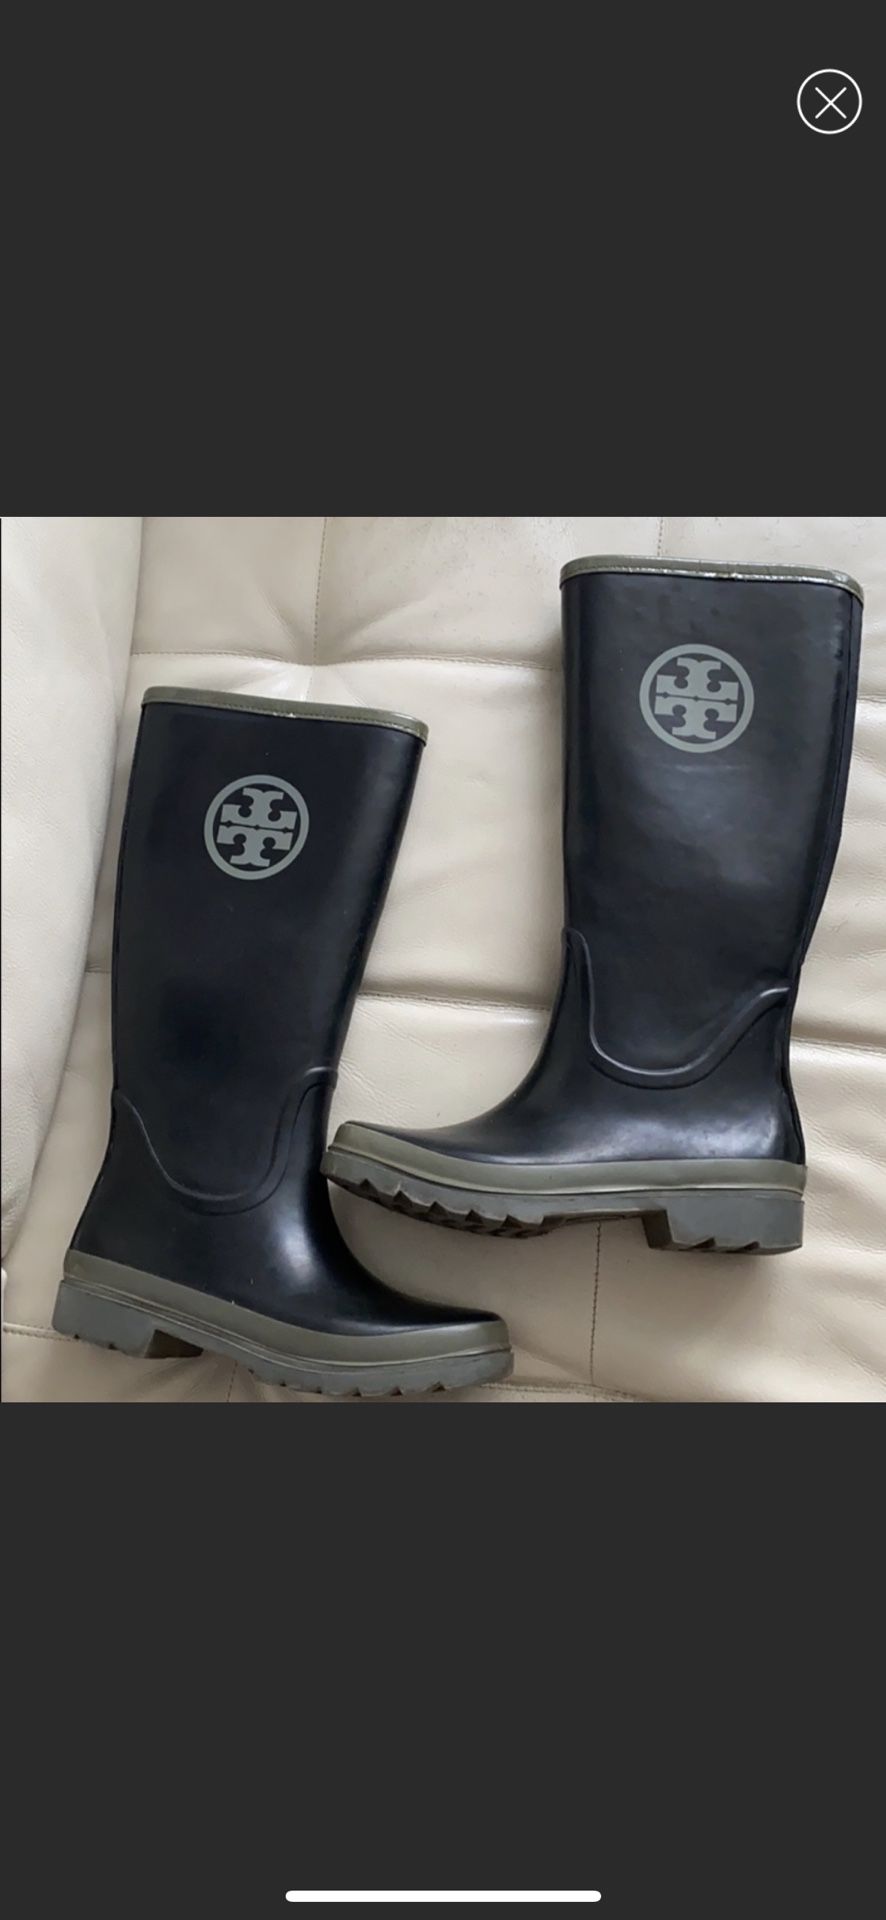 Tory Burch Rain boots $70 for Sale in New York, NY - OfferUp